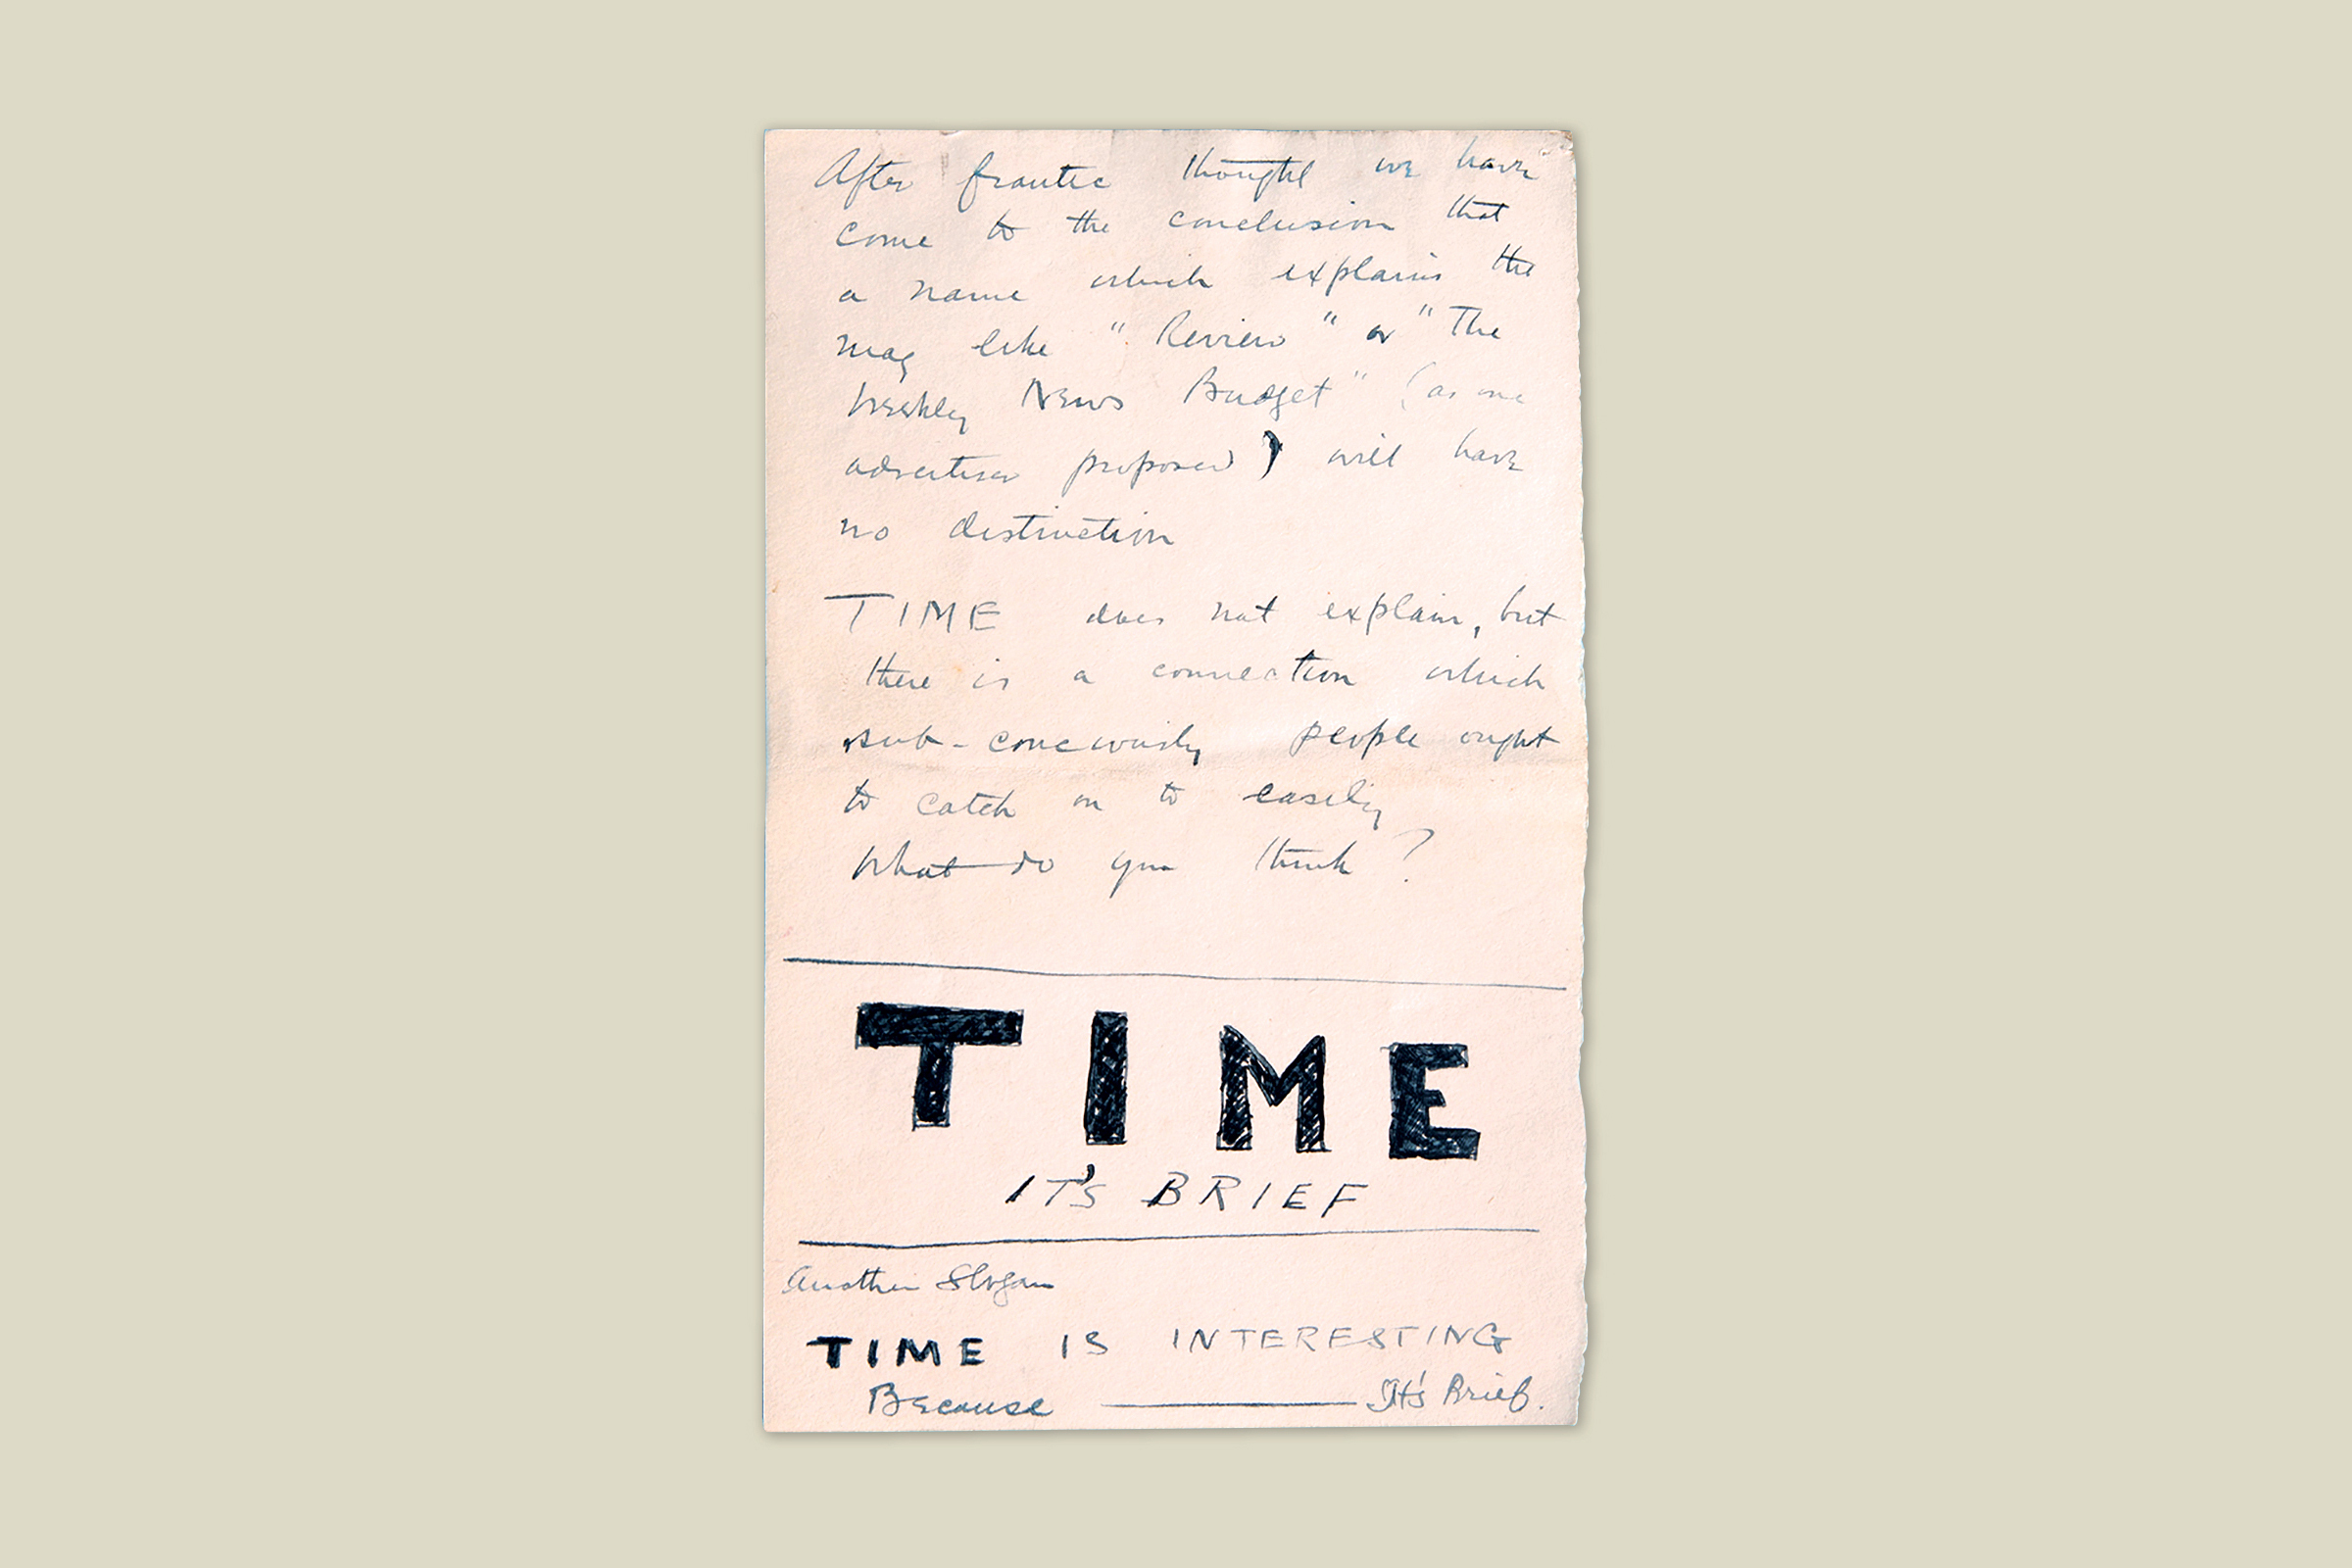 <strong>Letter From Henry Luce to Parents:</strong> When TIME’s co-founders Briton Hadden and Henry Luce were still in pre-production on the new kind of news magazine, they played around with a number of titles for their publication. Here, Luce tells his parents about the idea to call the magazine “TIME,” and plays around with some slogans that would be used in later advertising campaigns. (Fan Chen for TIME; Photo-illustration by TIME)